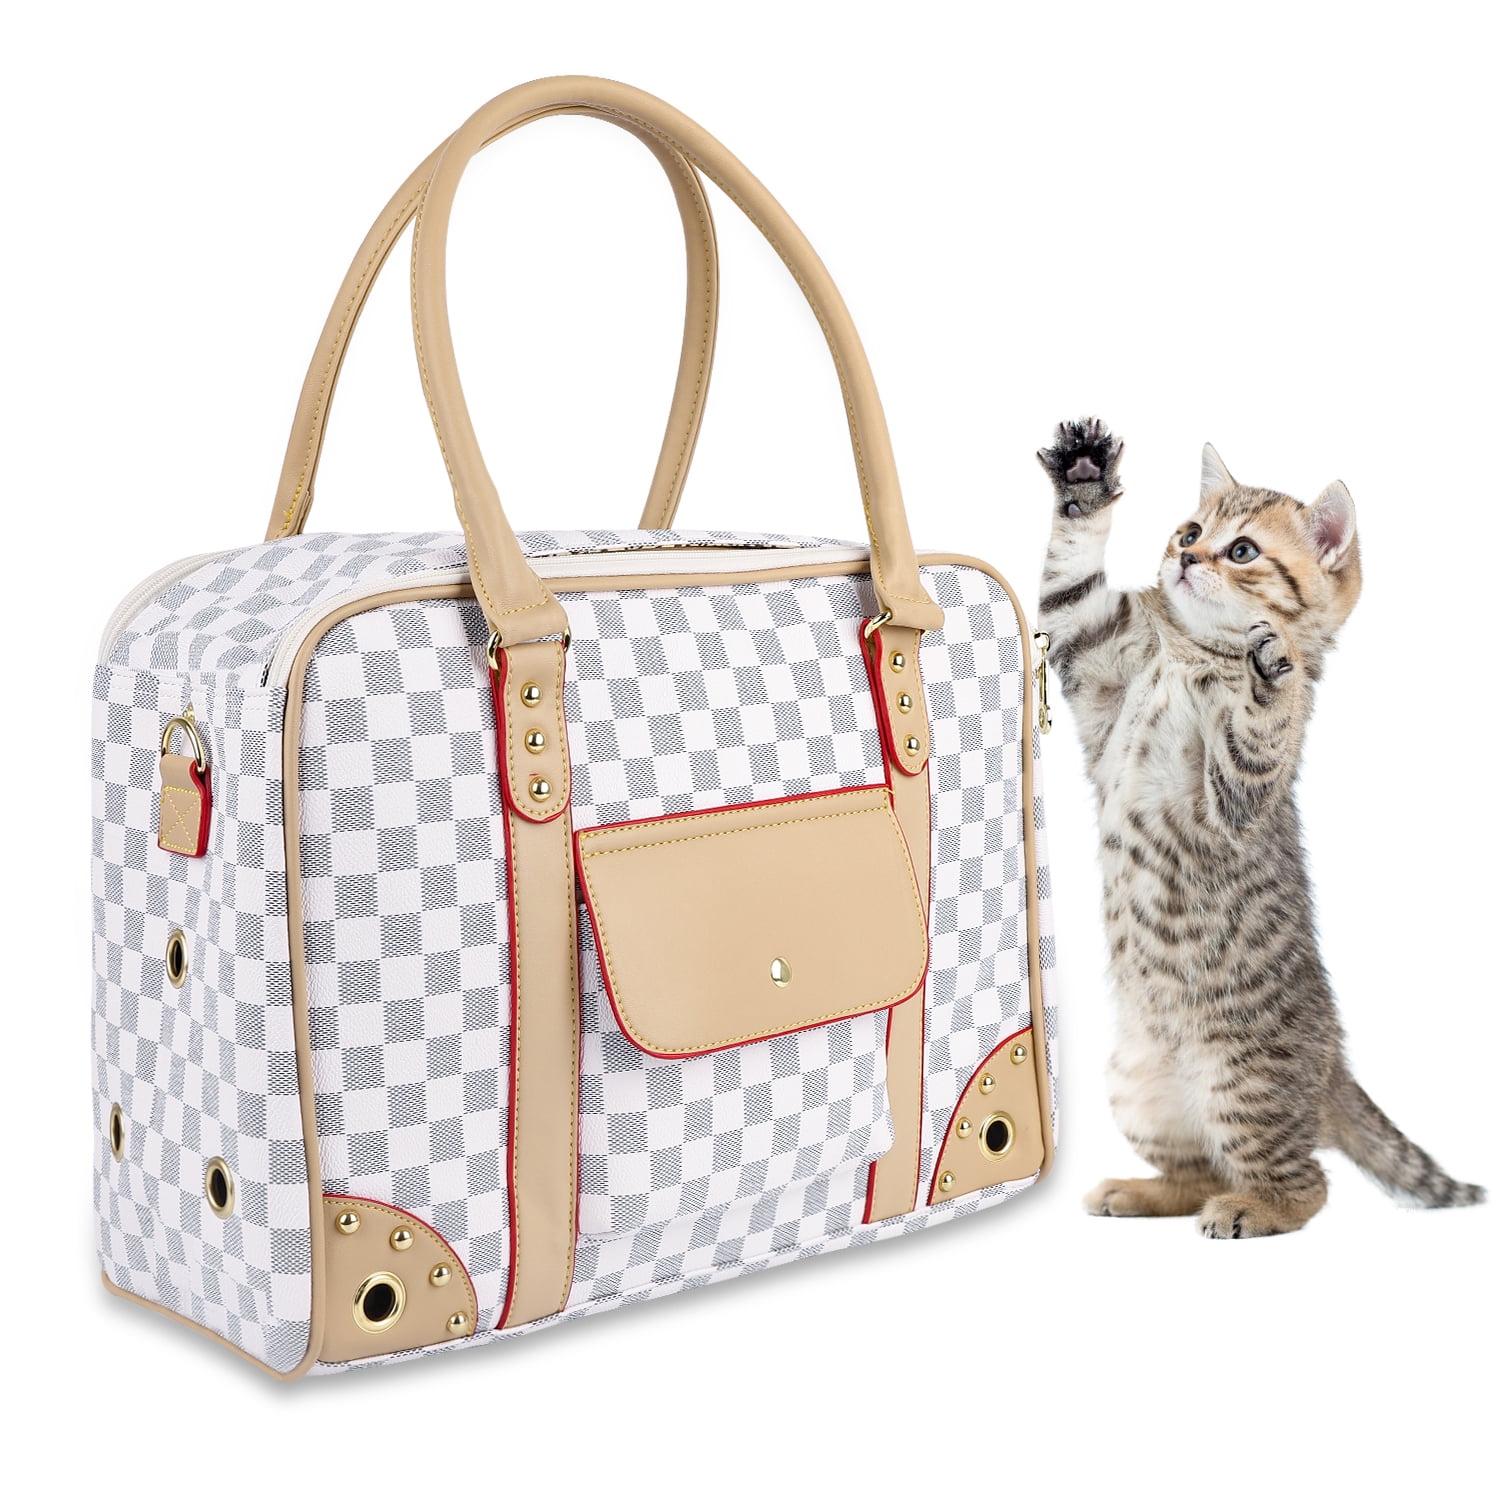 xuyidan Fashion Pet Carrier Dog Purse Foldable Dog Cat Handbag Leather Tote  Bag Soft-Sided Carriering for Puppy and Small Dogs Portable Travel  Airline-Approved, (White, S) 